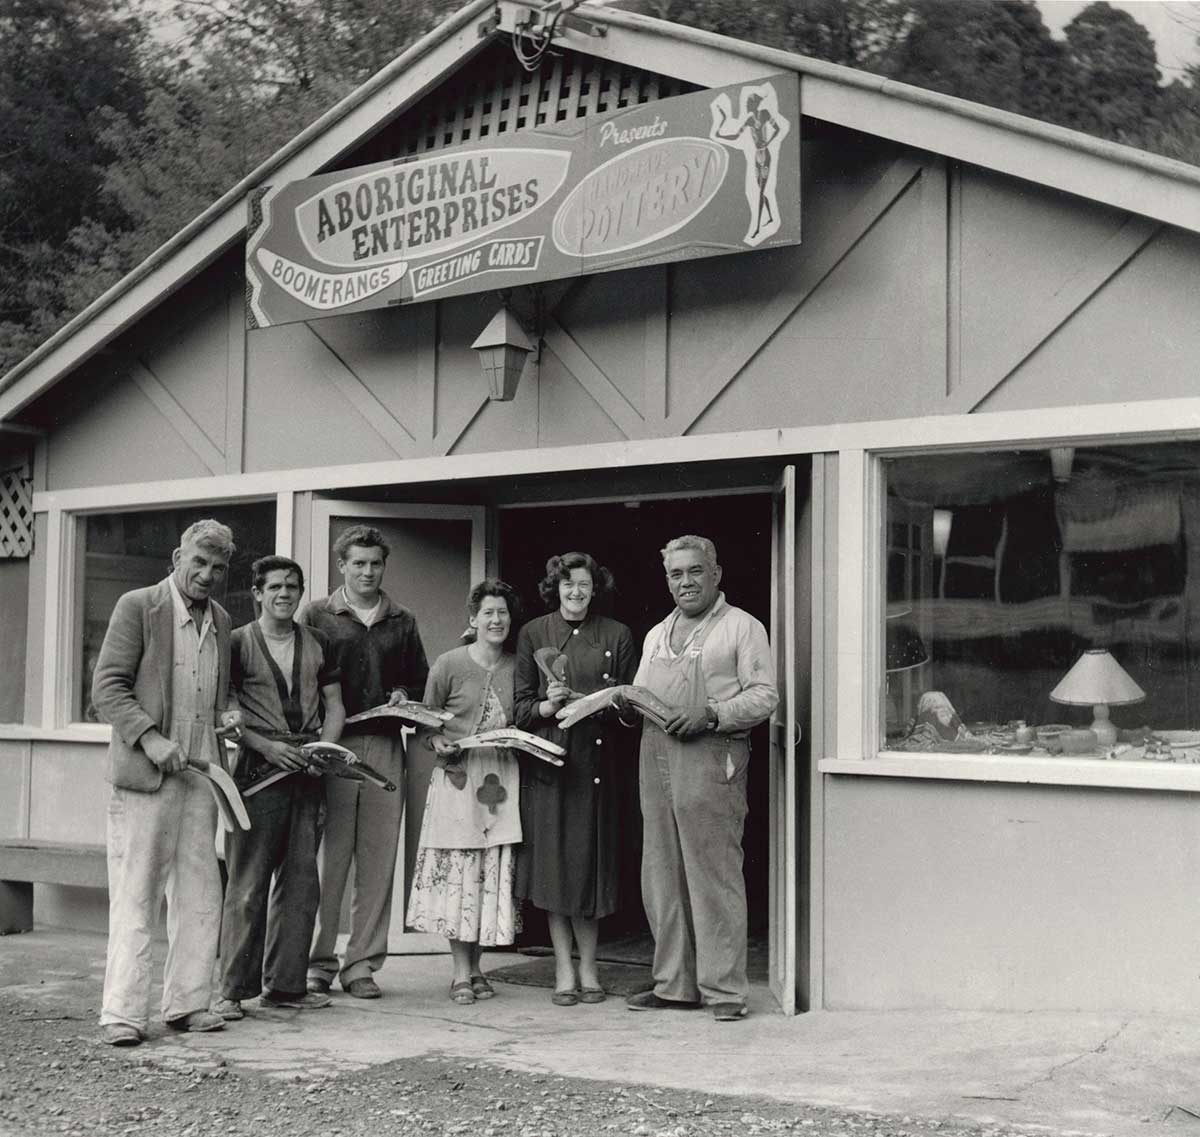 Black and white photograph of four men and two women standing outside a retail store called Aboriginal Enterprises. The signage above indicates the store's wares including boomerangs, greeting cards and handmade pottery.